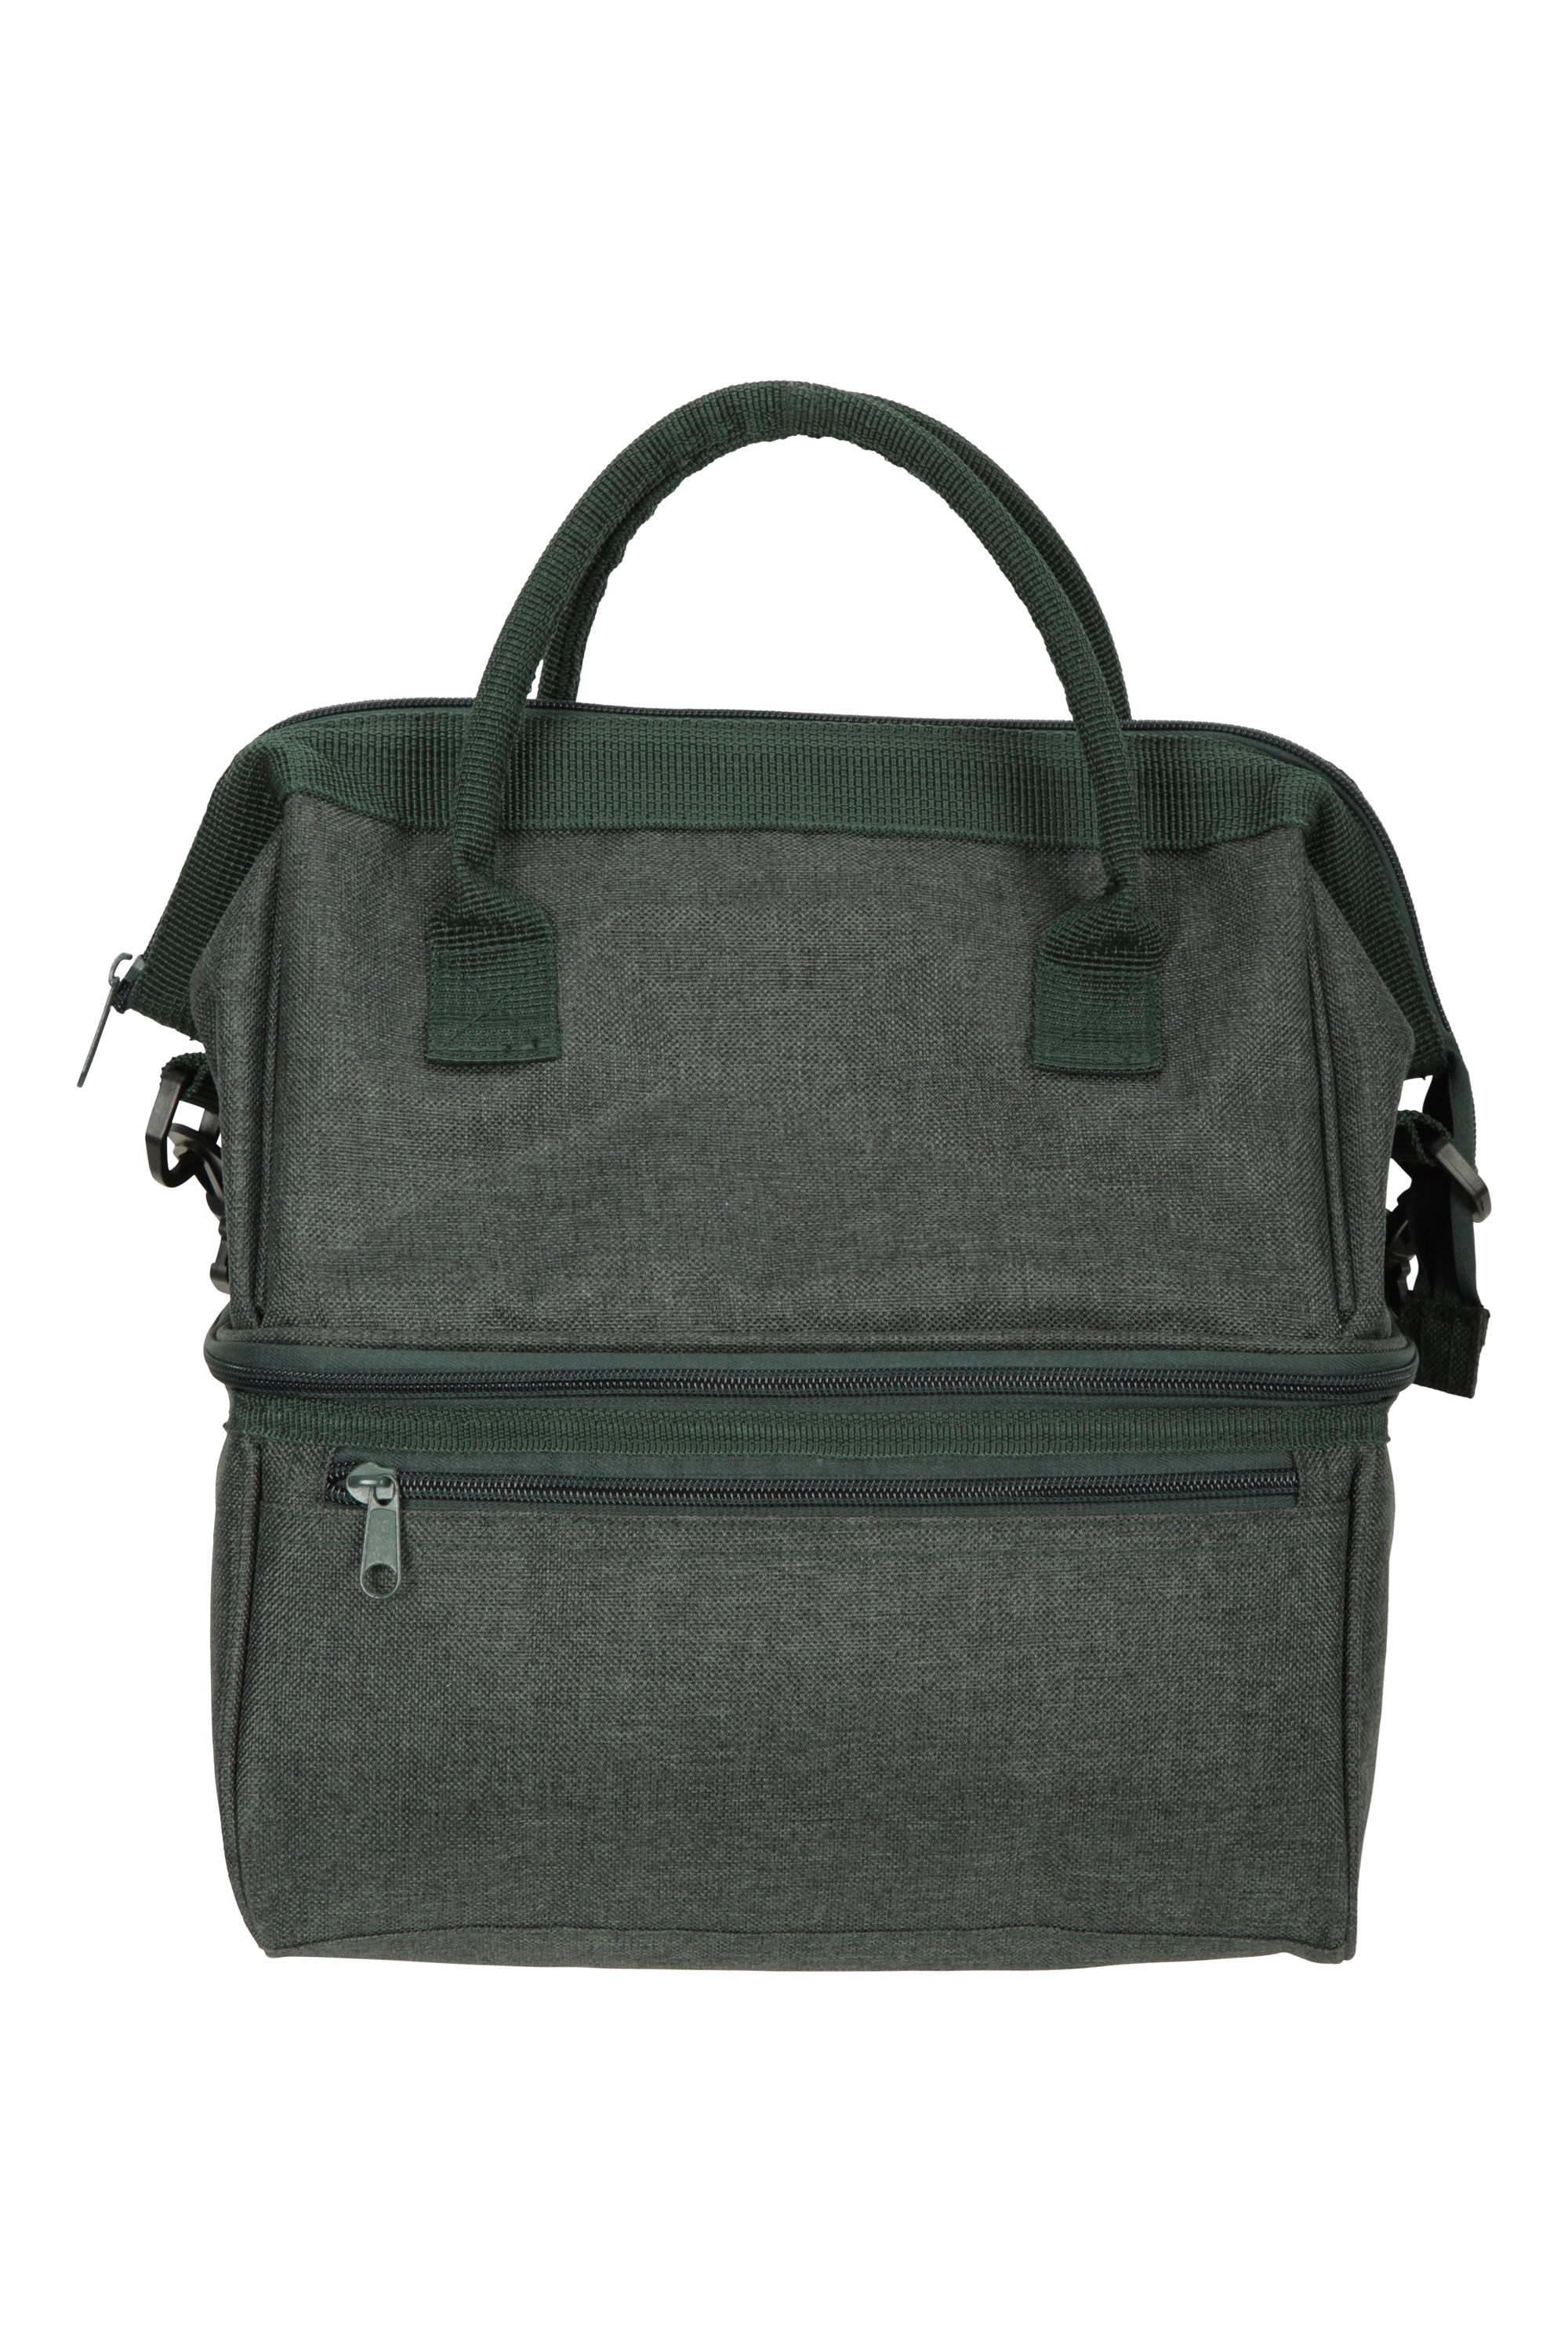 Insulated Picnic Bag - Green